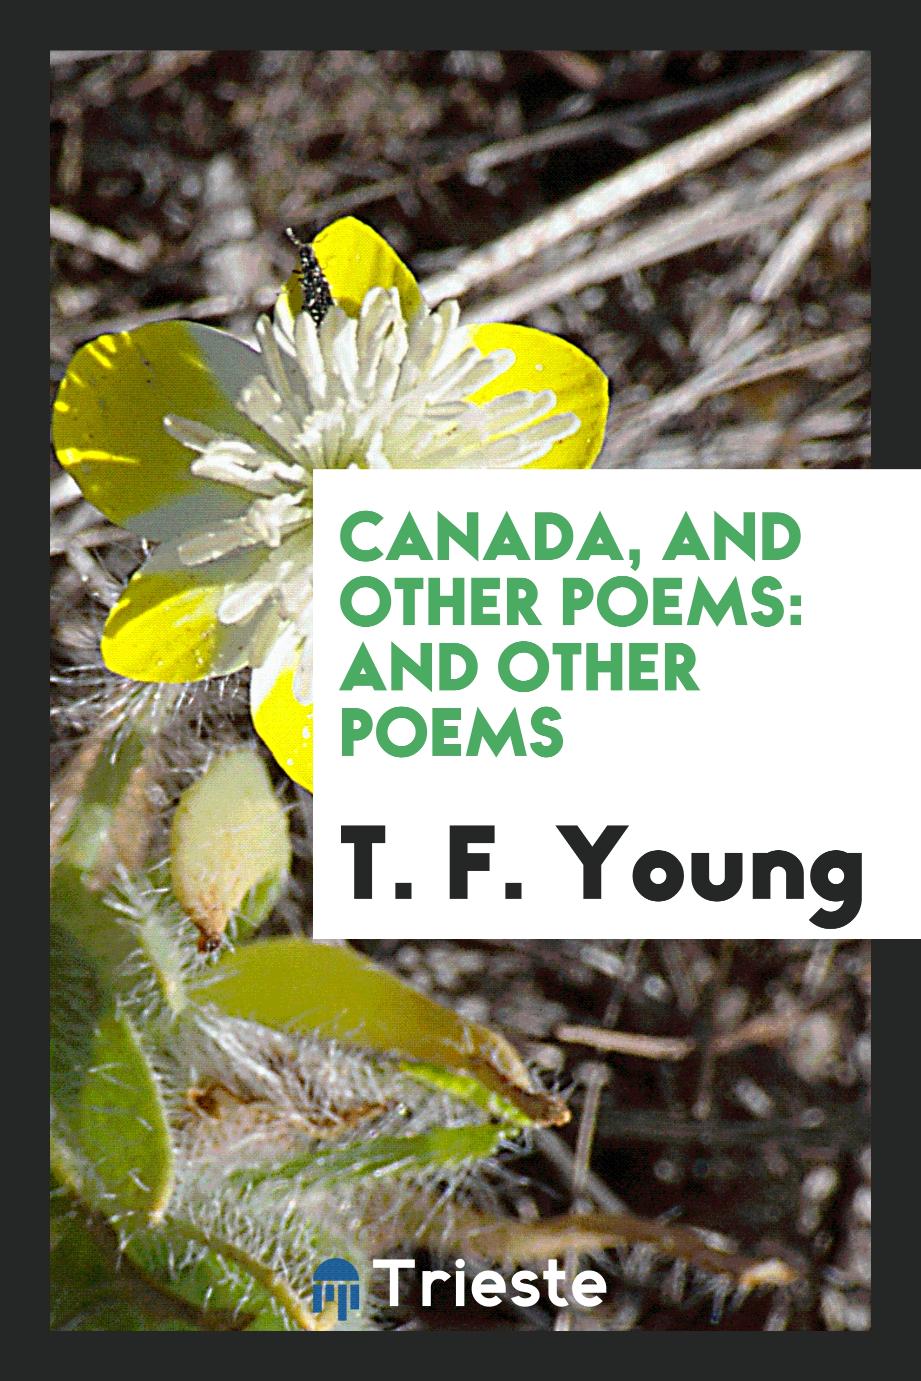 Canada, and Other Poems: And Other Poems